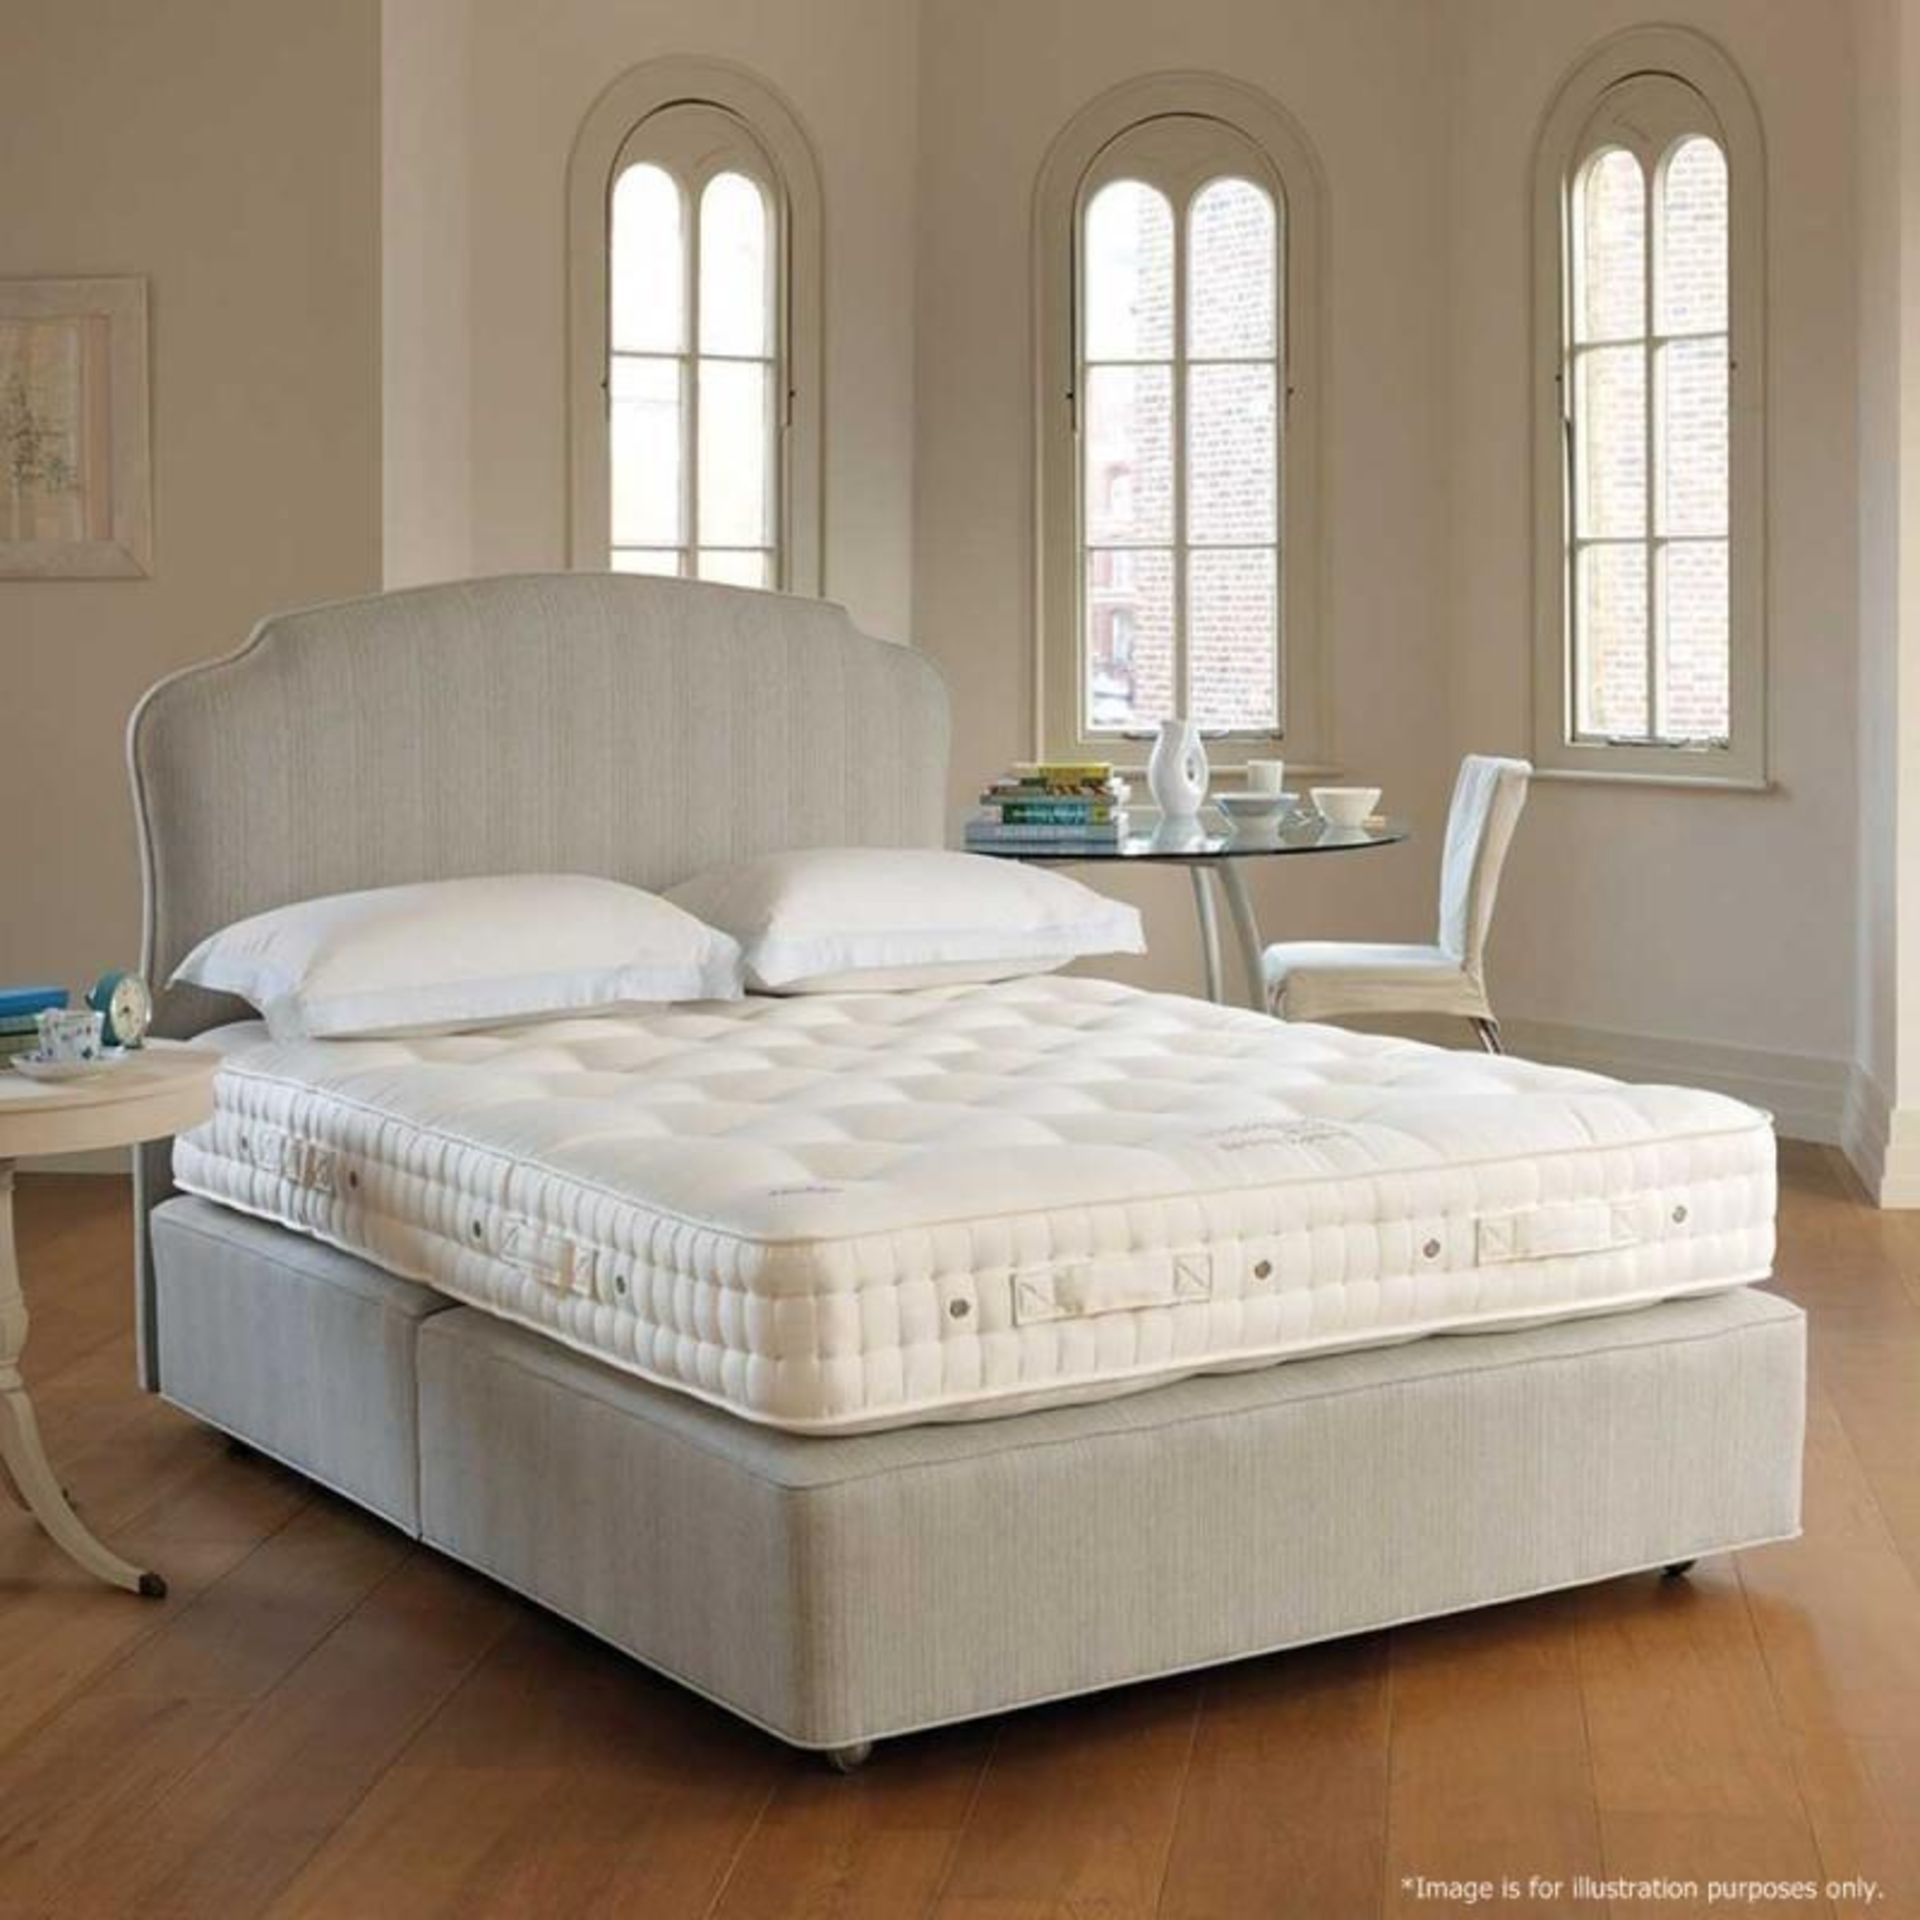 1 x KLUFT / VI-SPRING 'Lexington' Luxury Kingsize Divan Bed Base - Hand Crafted - Fitted With Cators